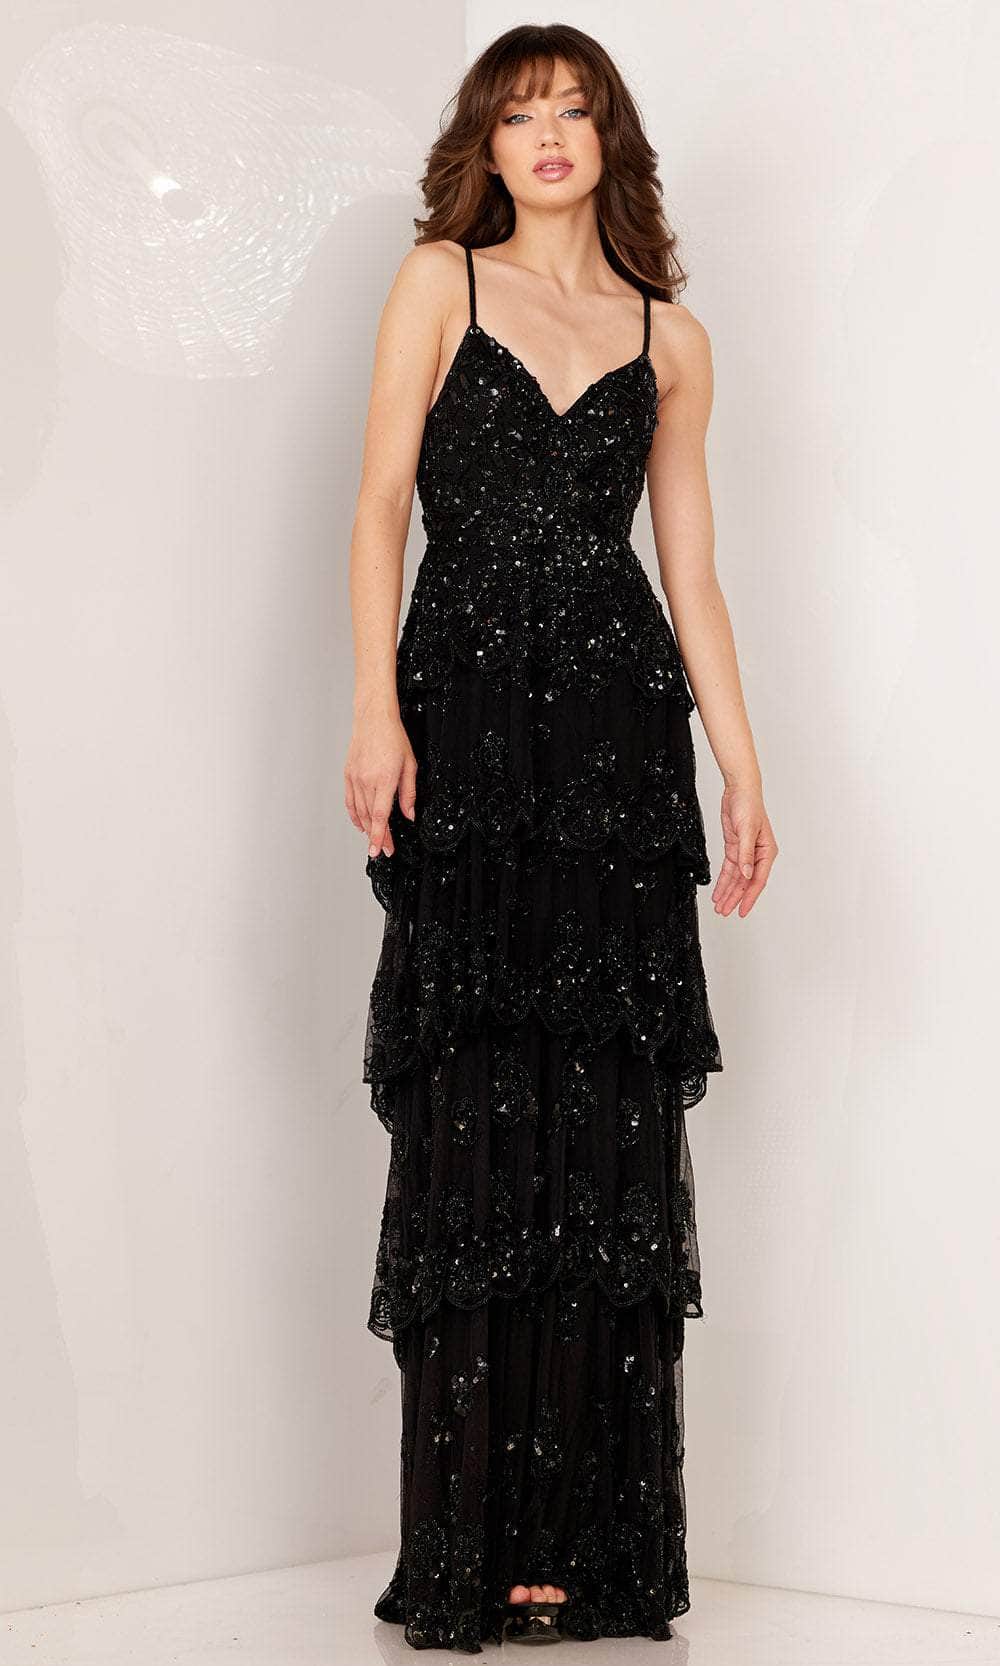 Image of Aleta Couture 1190 - Embroidered V-Neck Prom Dress